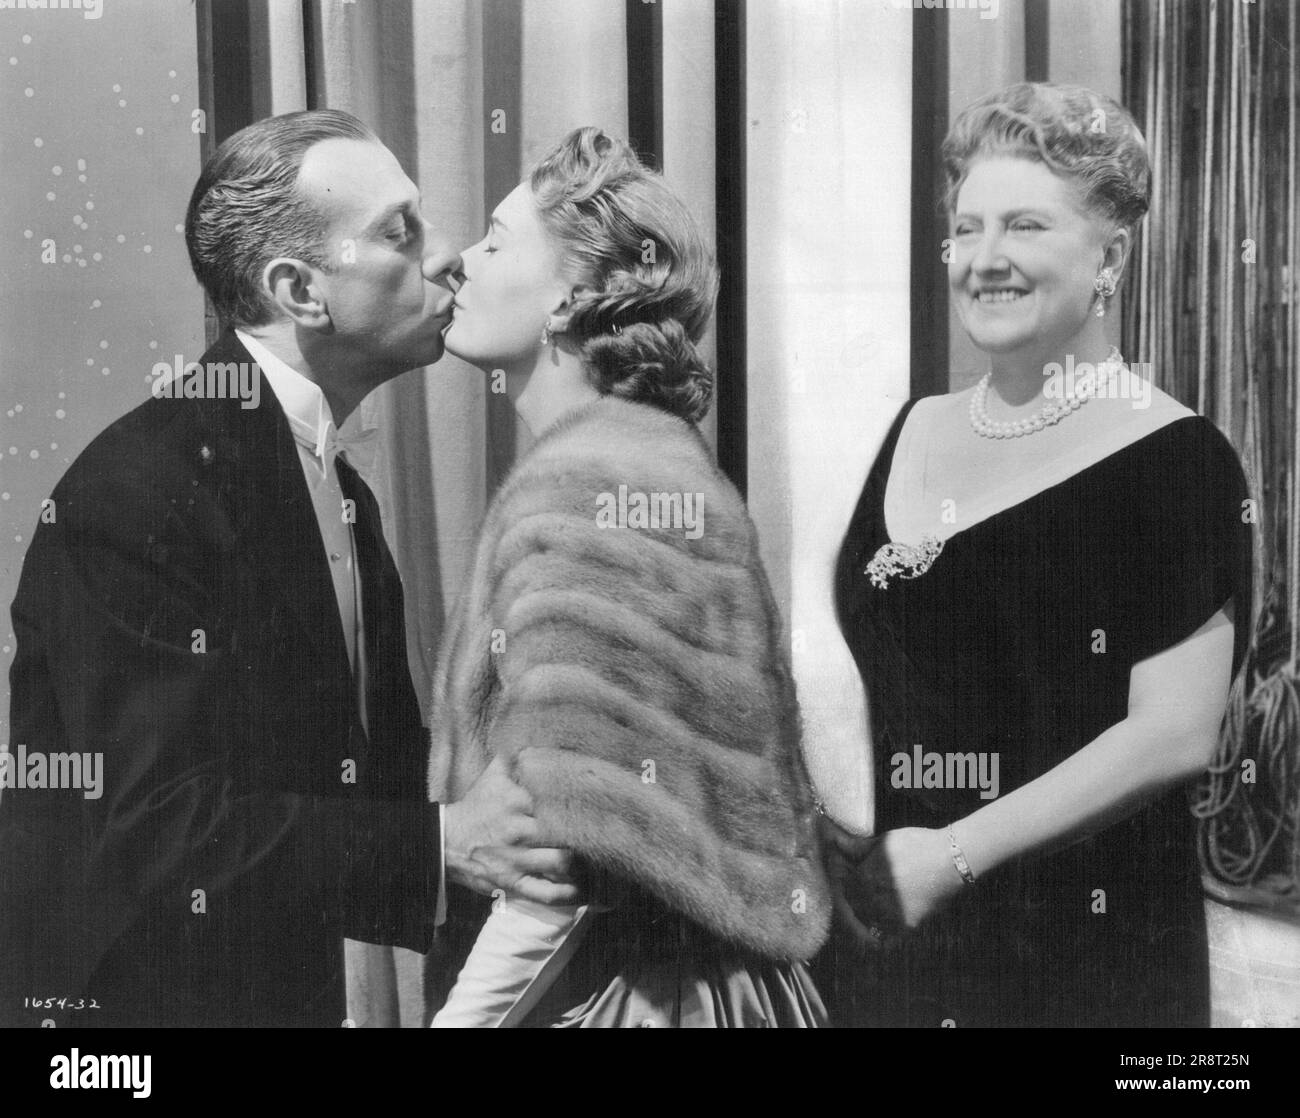 Happy Ending. . . A Kiss for Romberg from his beloved wife. Jose Ferrer is Romberg with Doe Avedon as his wife and Helen Traubel in the role of his devoted friend for M-G-M's all-star musical 'Deep In My Heart', based on the life and music or Romberg. Color, Wide-screen musical romance starring Jose Ferrer, Merle ***** Helen Traubel, Walter Pidgeon, and Doe Avedon. The Cast also includes a galaxy of Glamorous guest stars including Rosemary Clooney, Fred And Gene Kelly, Ann Miller Cyd Charisse, James Mitchell, Tony Martin, Jane Powell, Vic Damone, Howard Keel and Joan Weldon. February 12, 1955. Stock Photo